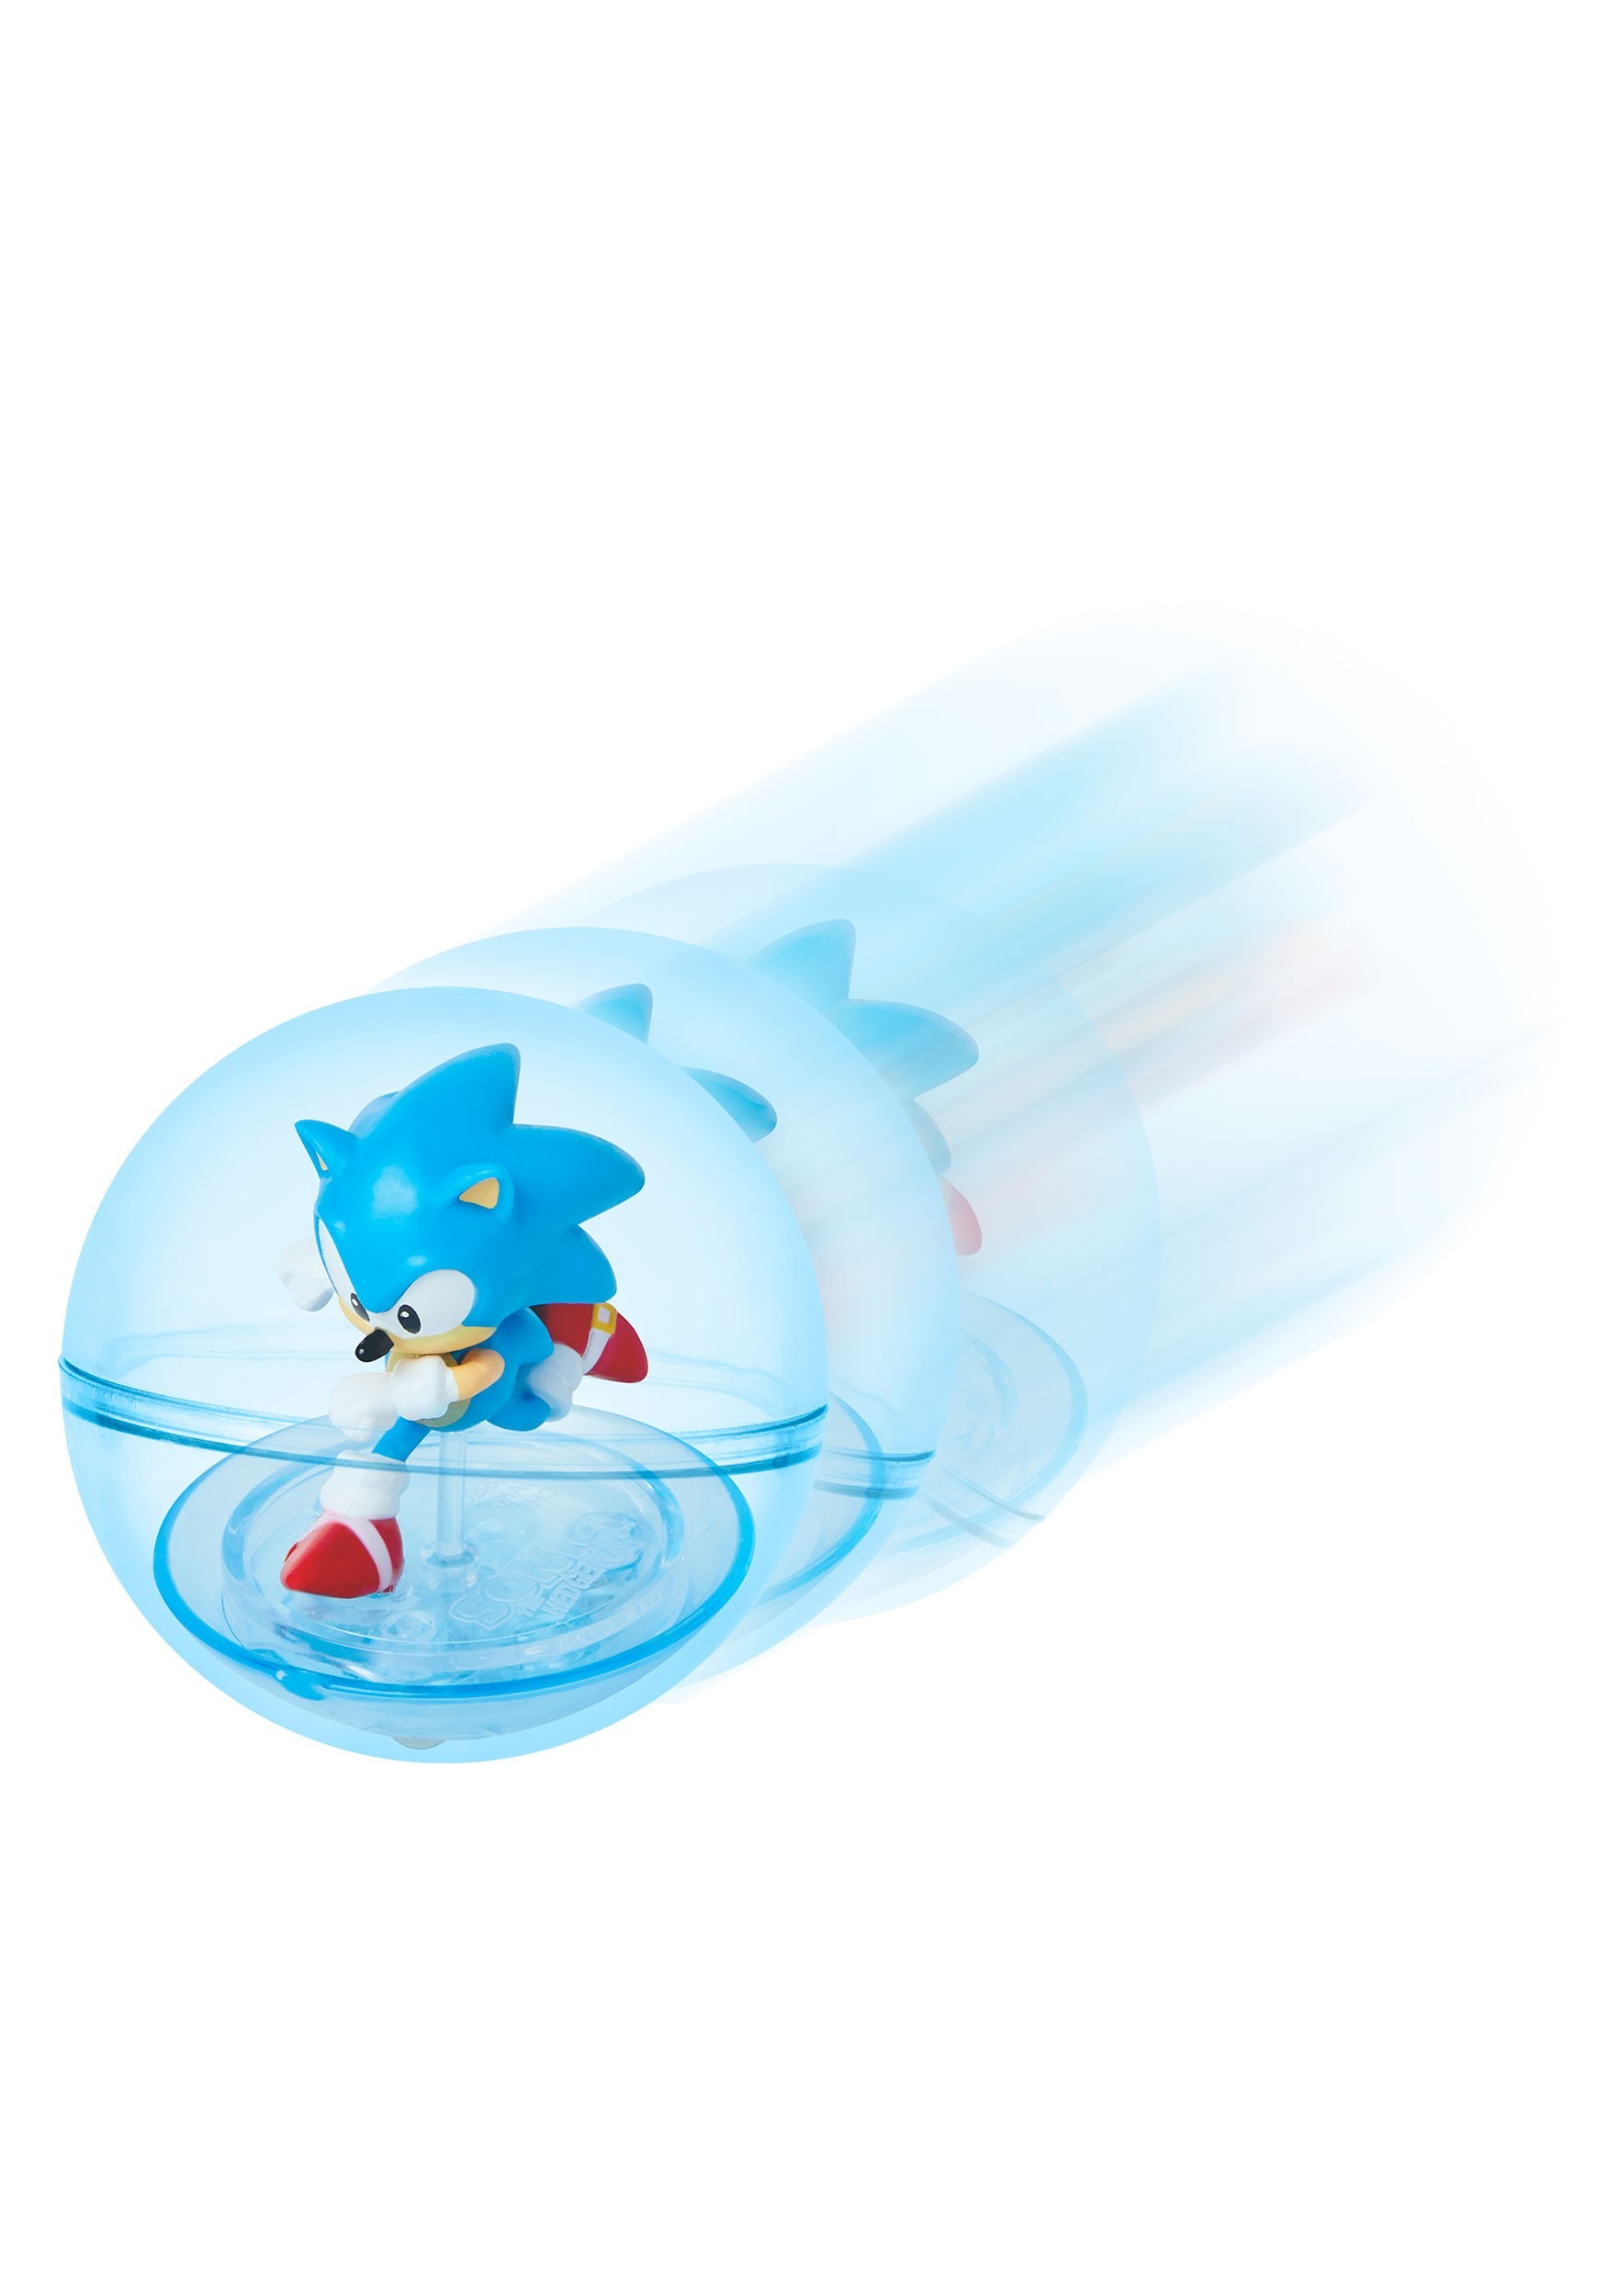 Sonic Spin Dash. Dash and Spin super fast Sonic. Спин деш 16 бит.